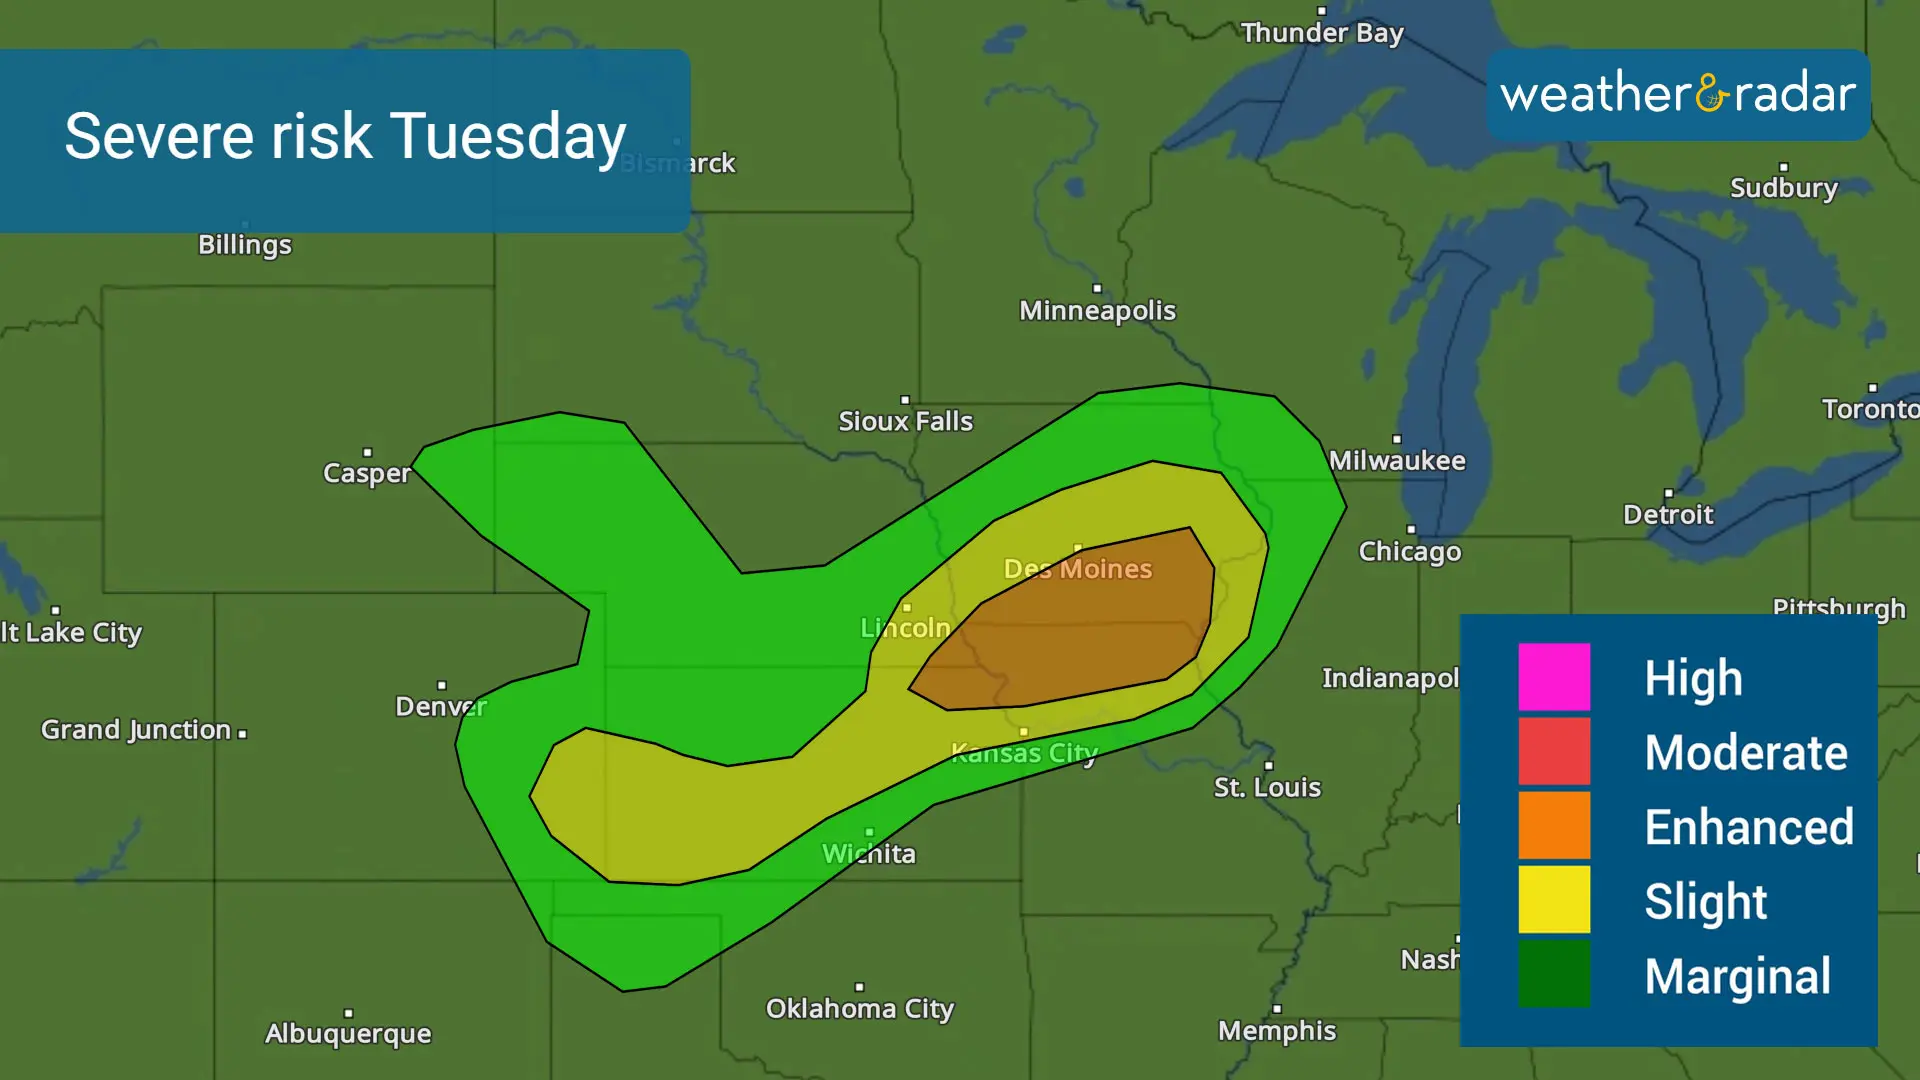 Tuesday's severe risk